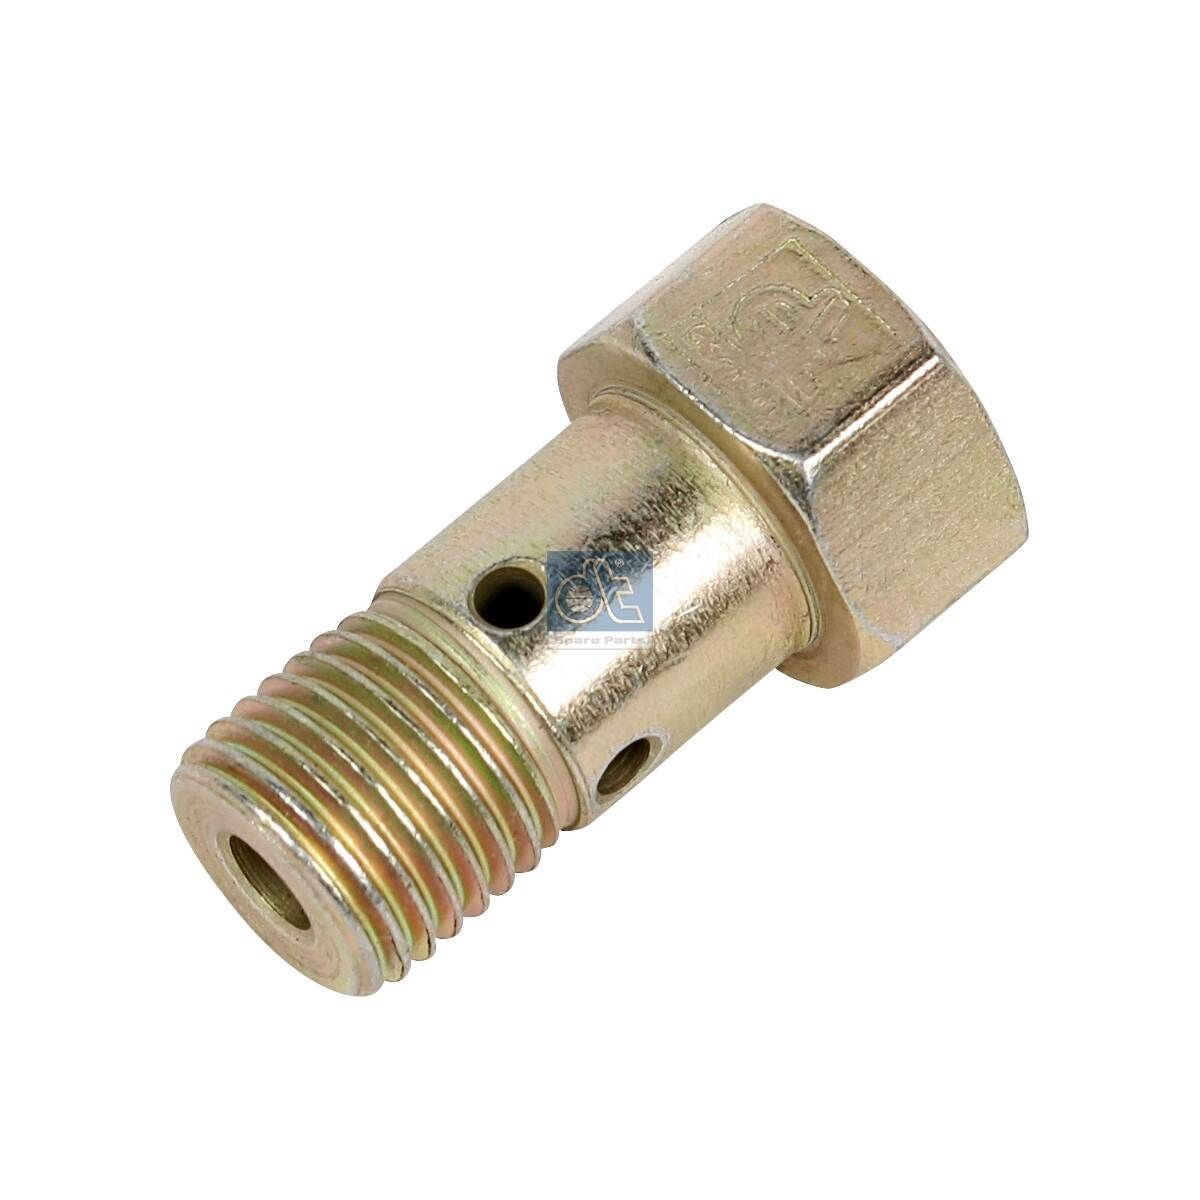 DT Spare Parts 1.12219 Overflow Valve cheap in online store